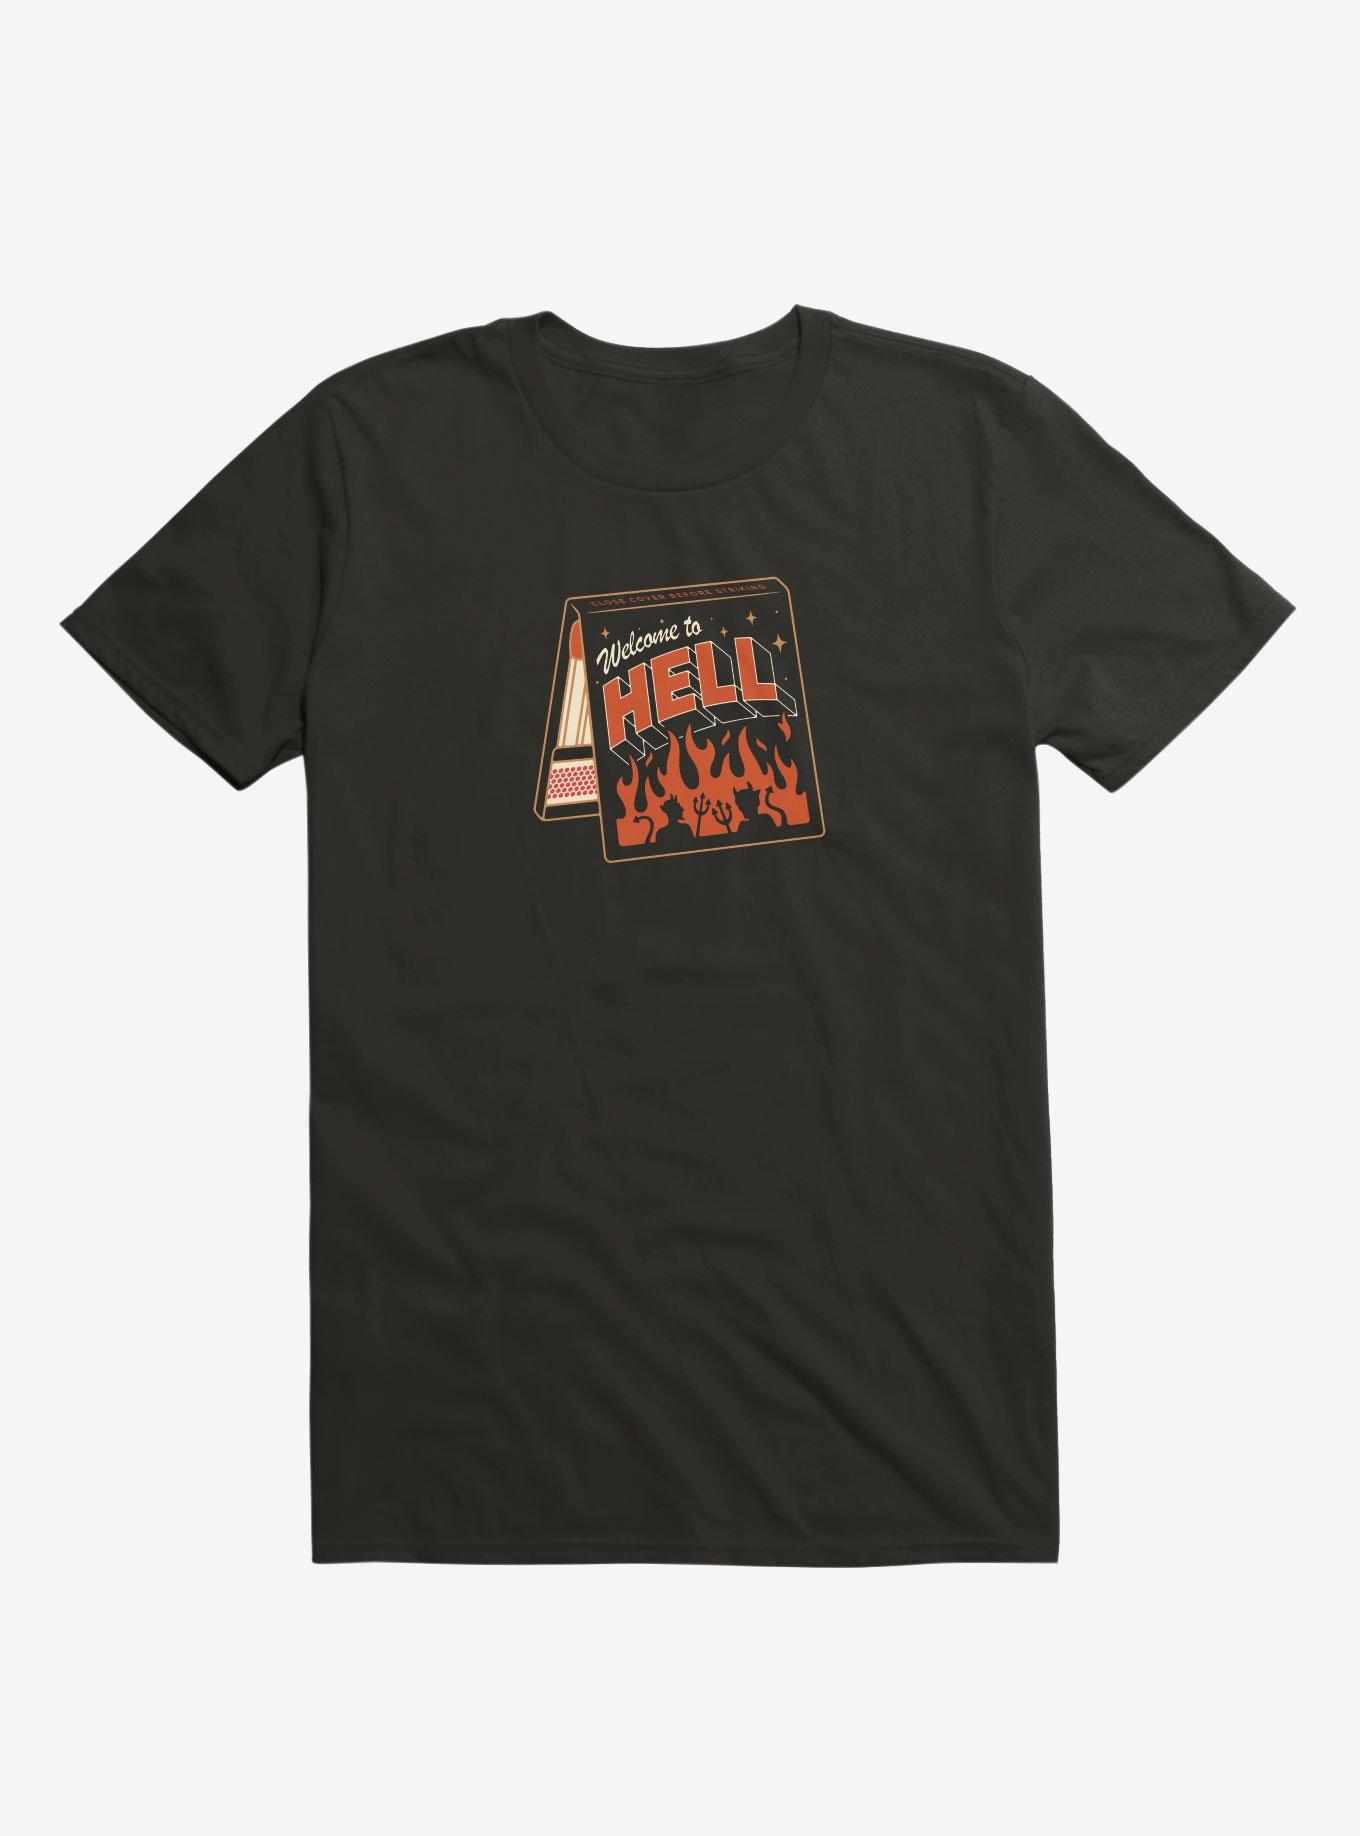 Match Made in Hell T-Shirt, BLACK, hi-res